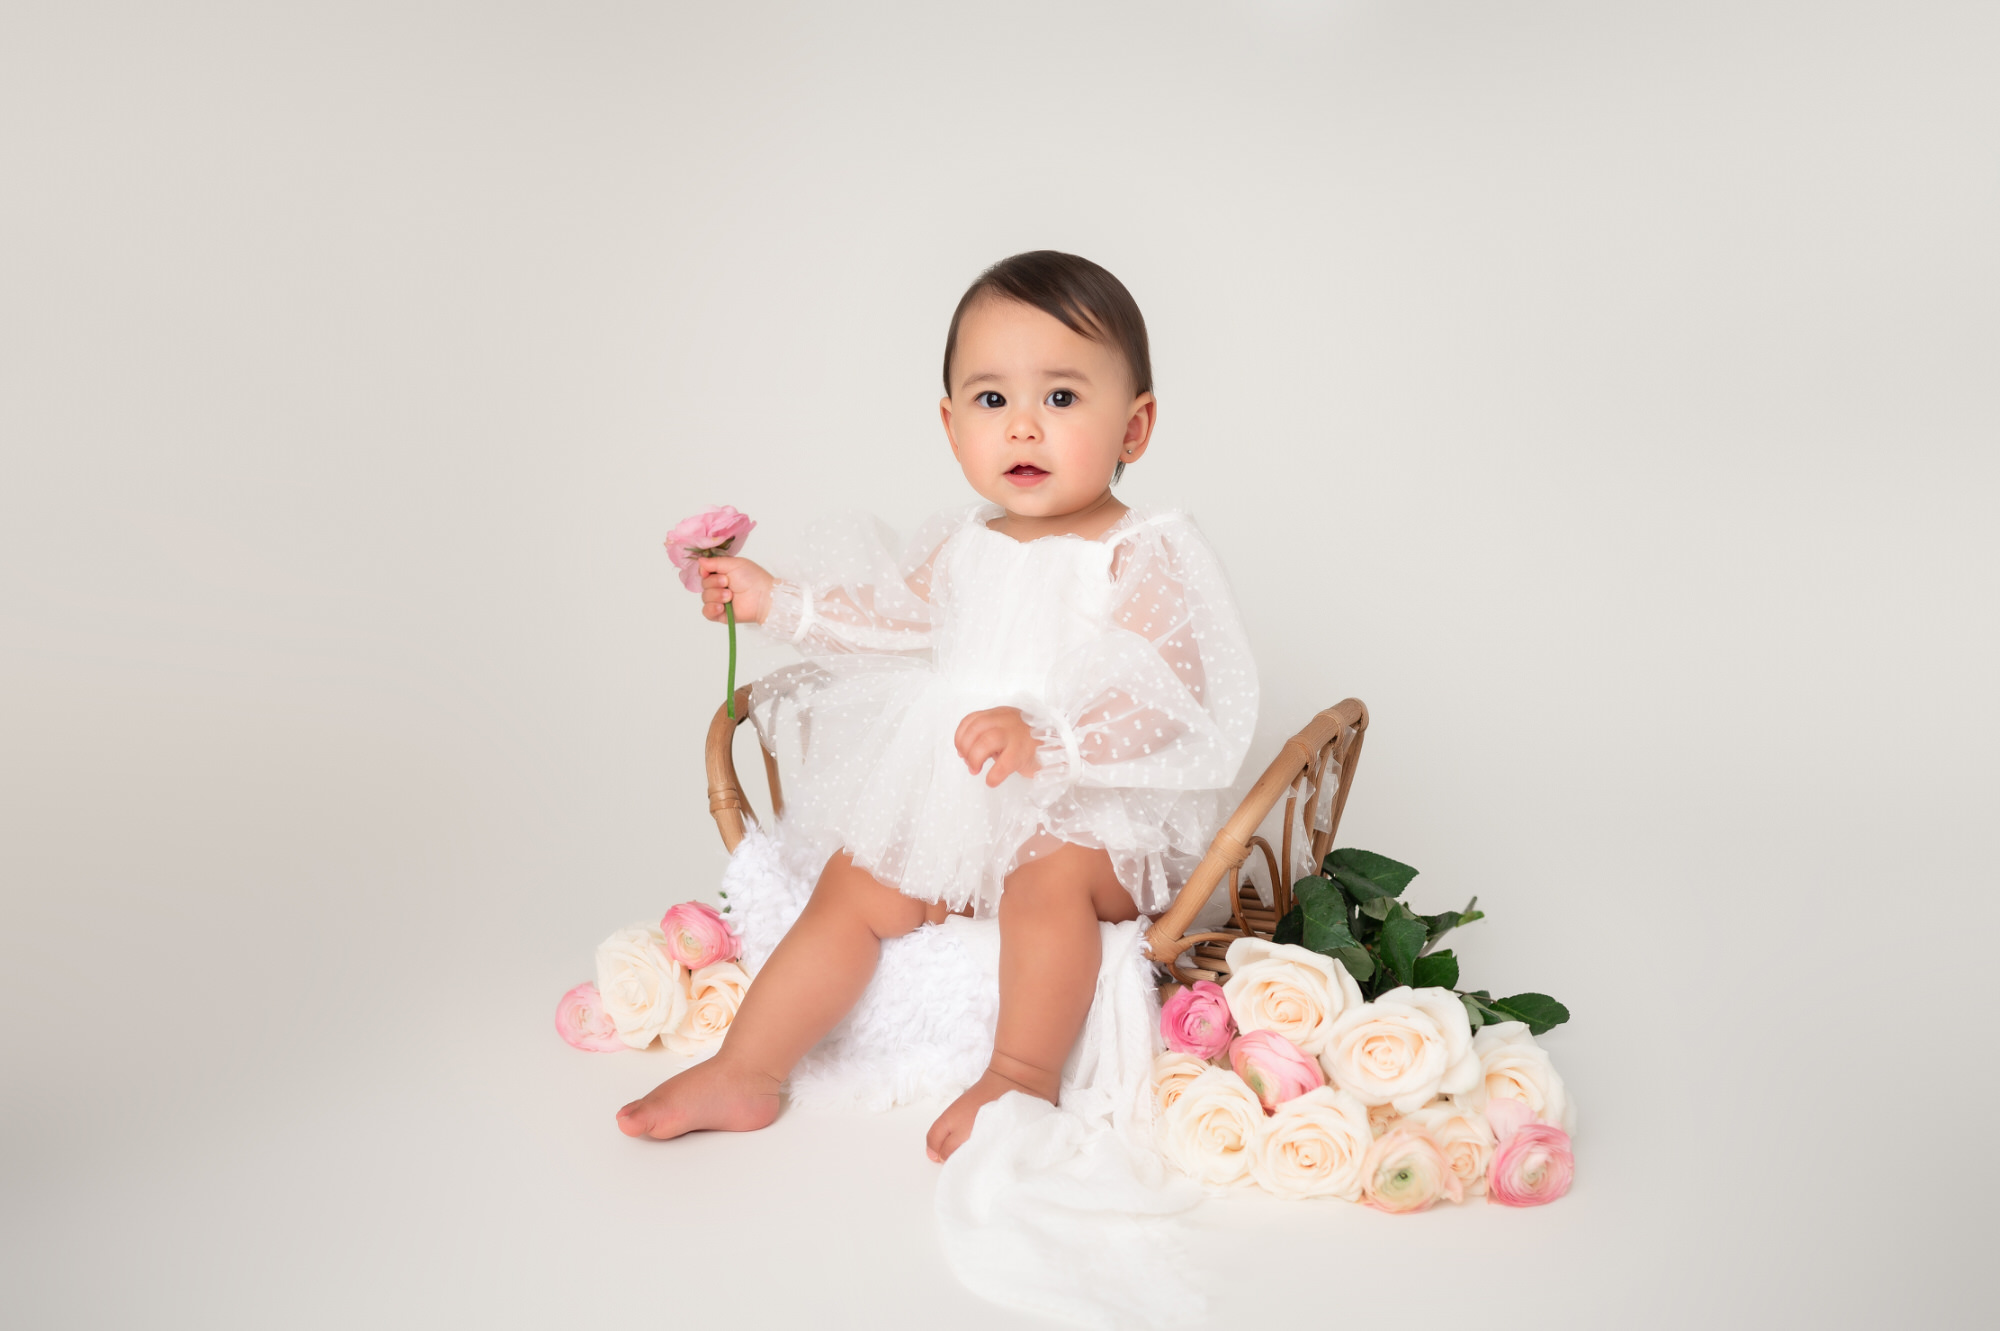 one year old in white dress studio photography surrounded by flowers • Baby